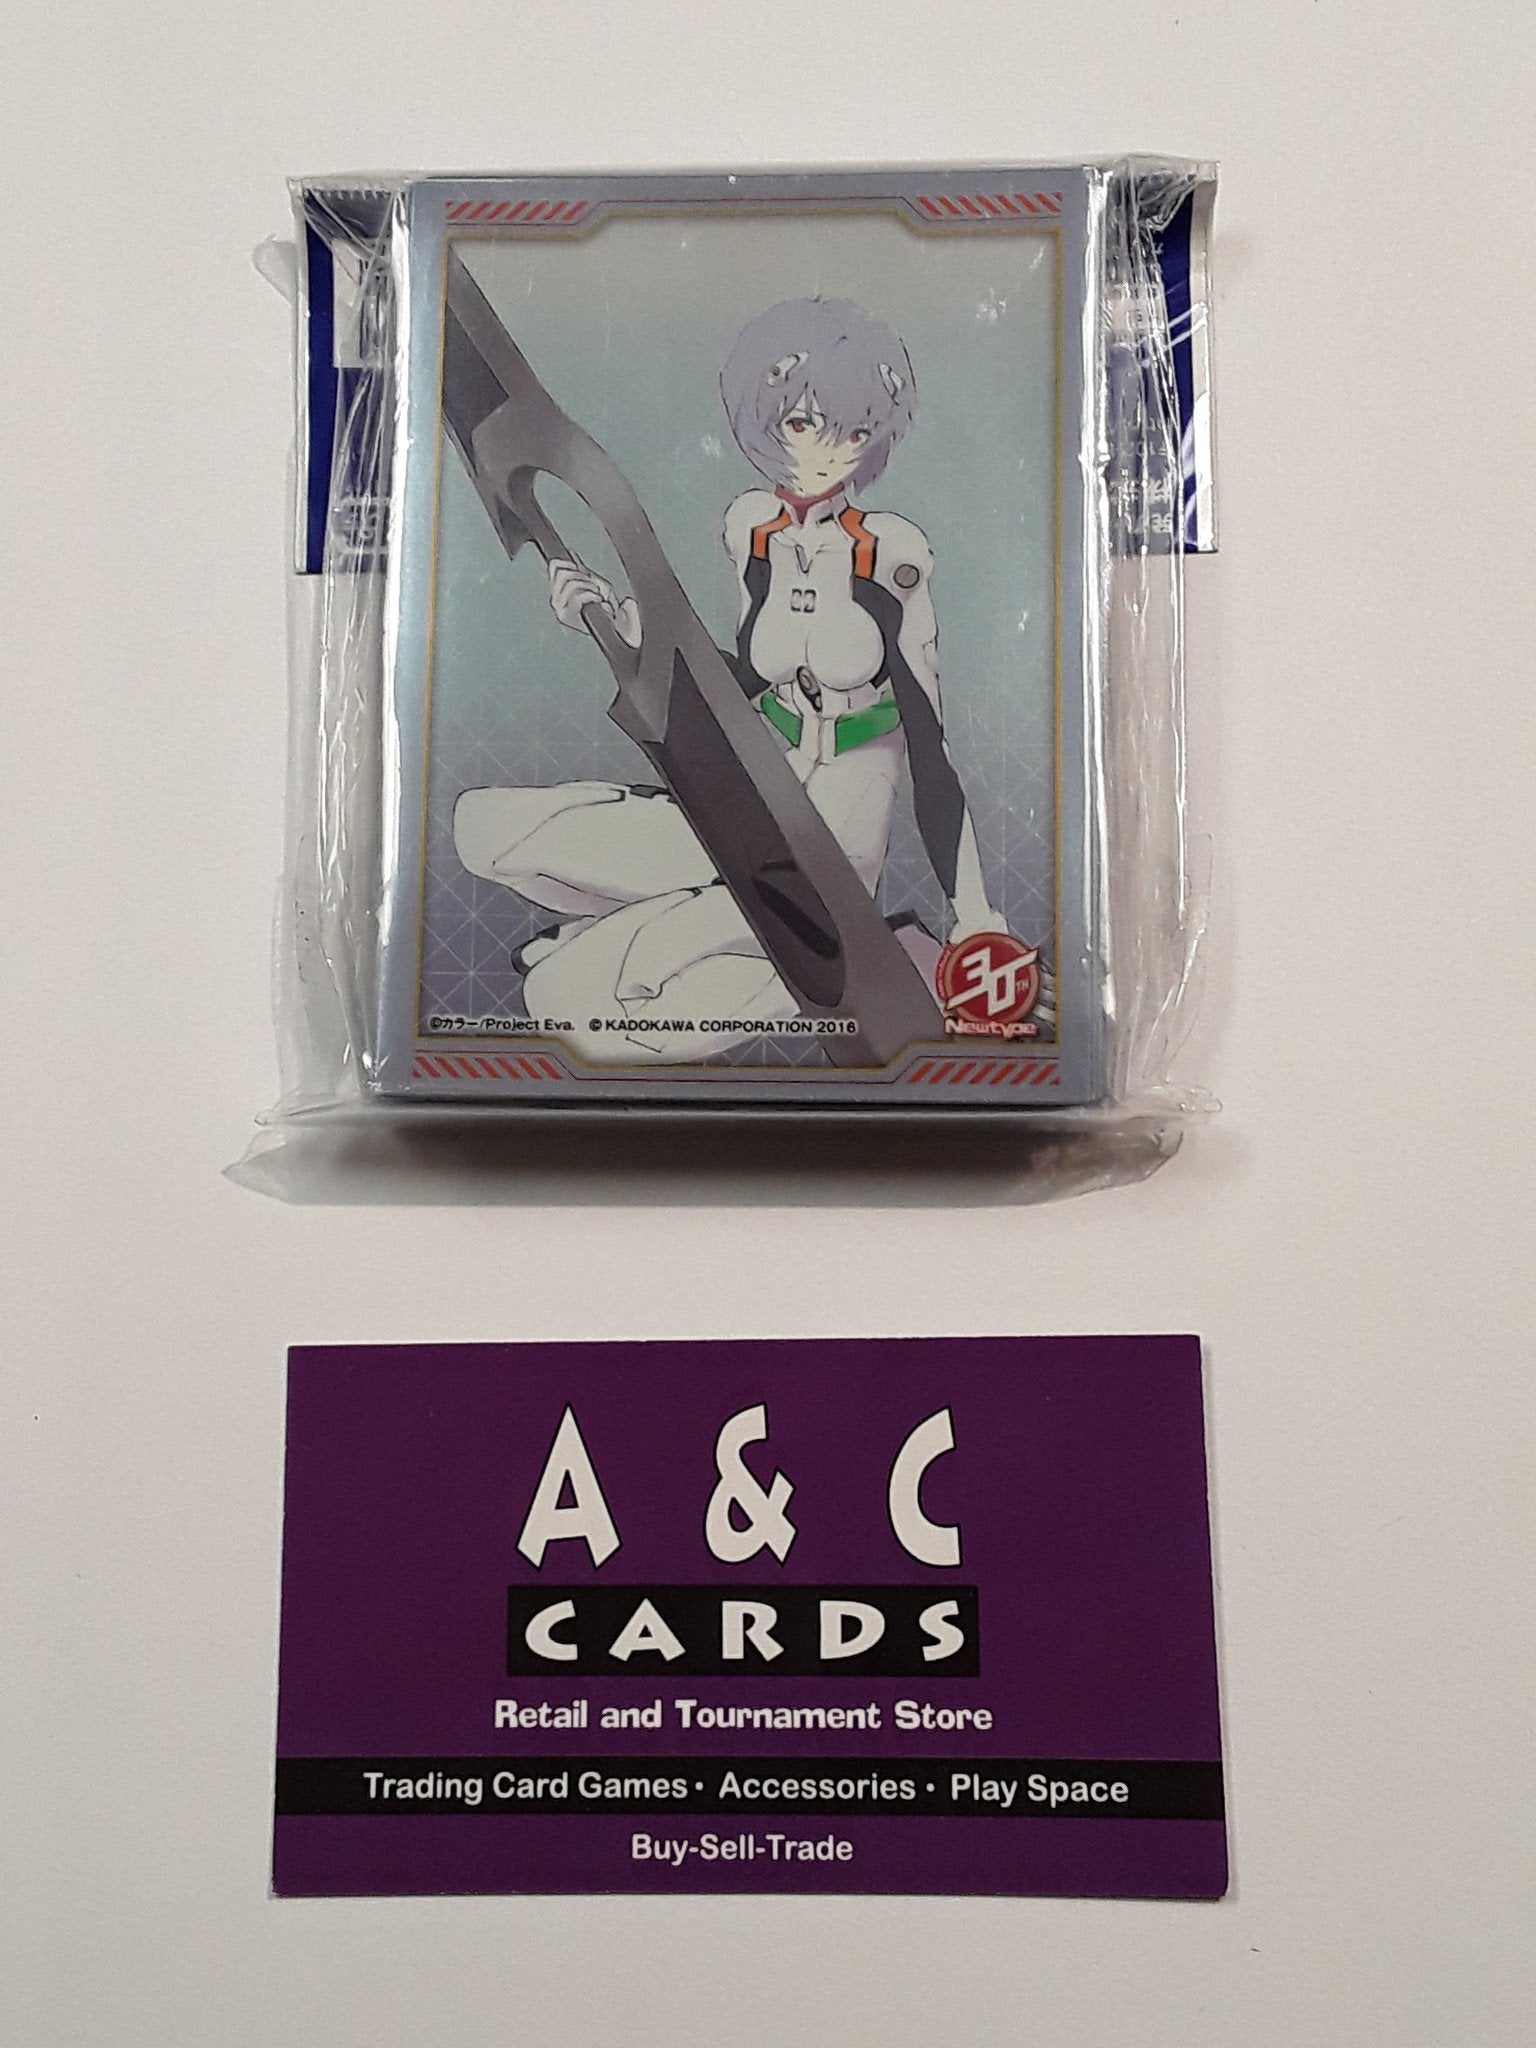 Character Sleeves "Rei Ayanami" #1 - 1 pack of Standard Size Sleeves 60pc. - Evangelion